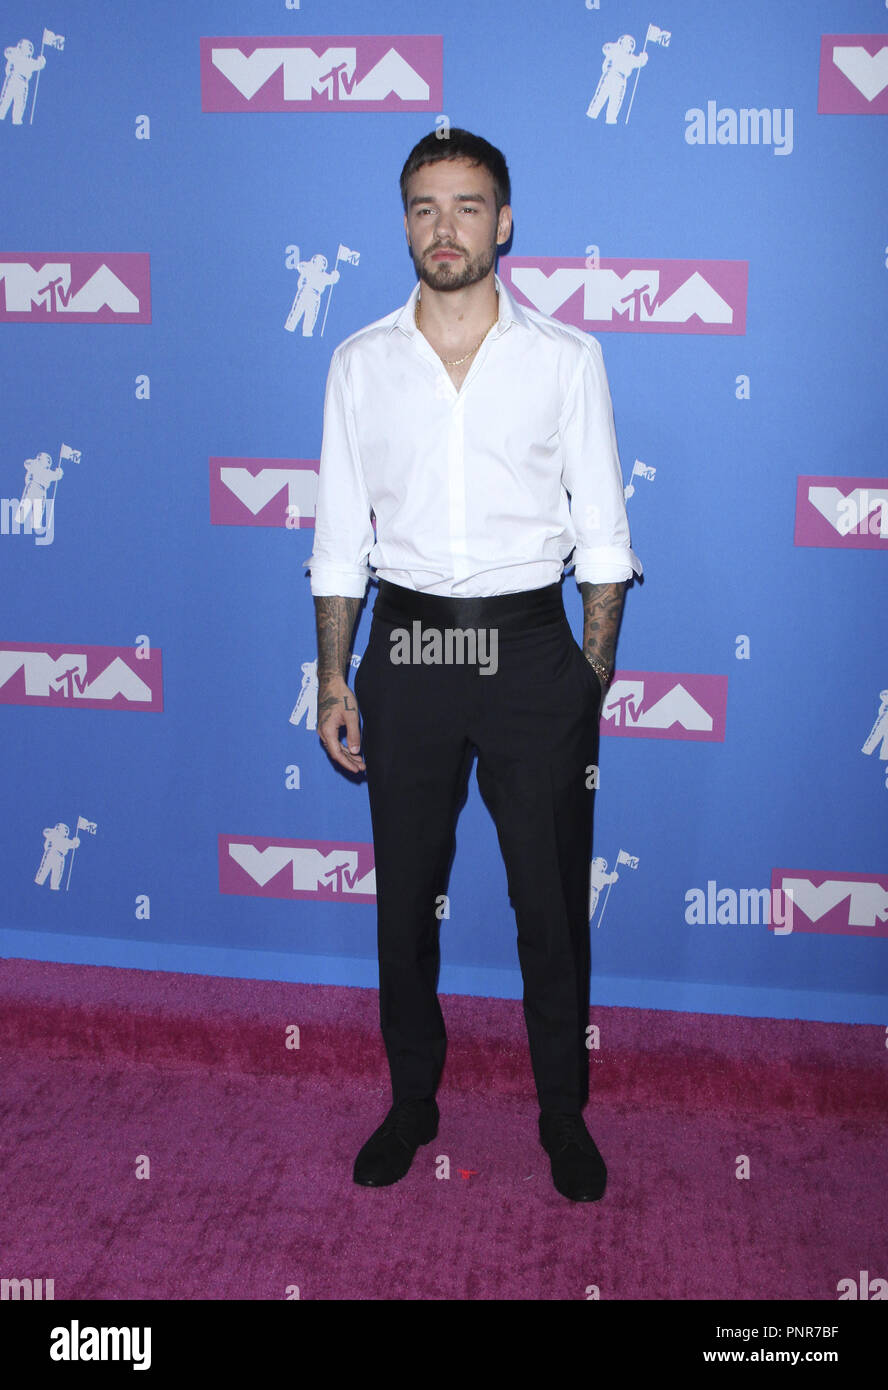 2018 MTV Video Music Awards - Arrivals  Featuring: Liam Payne Where: New York, New York, United States When: 20 Aug 2018 Credit: Apega/WENN.com Stock Photo